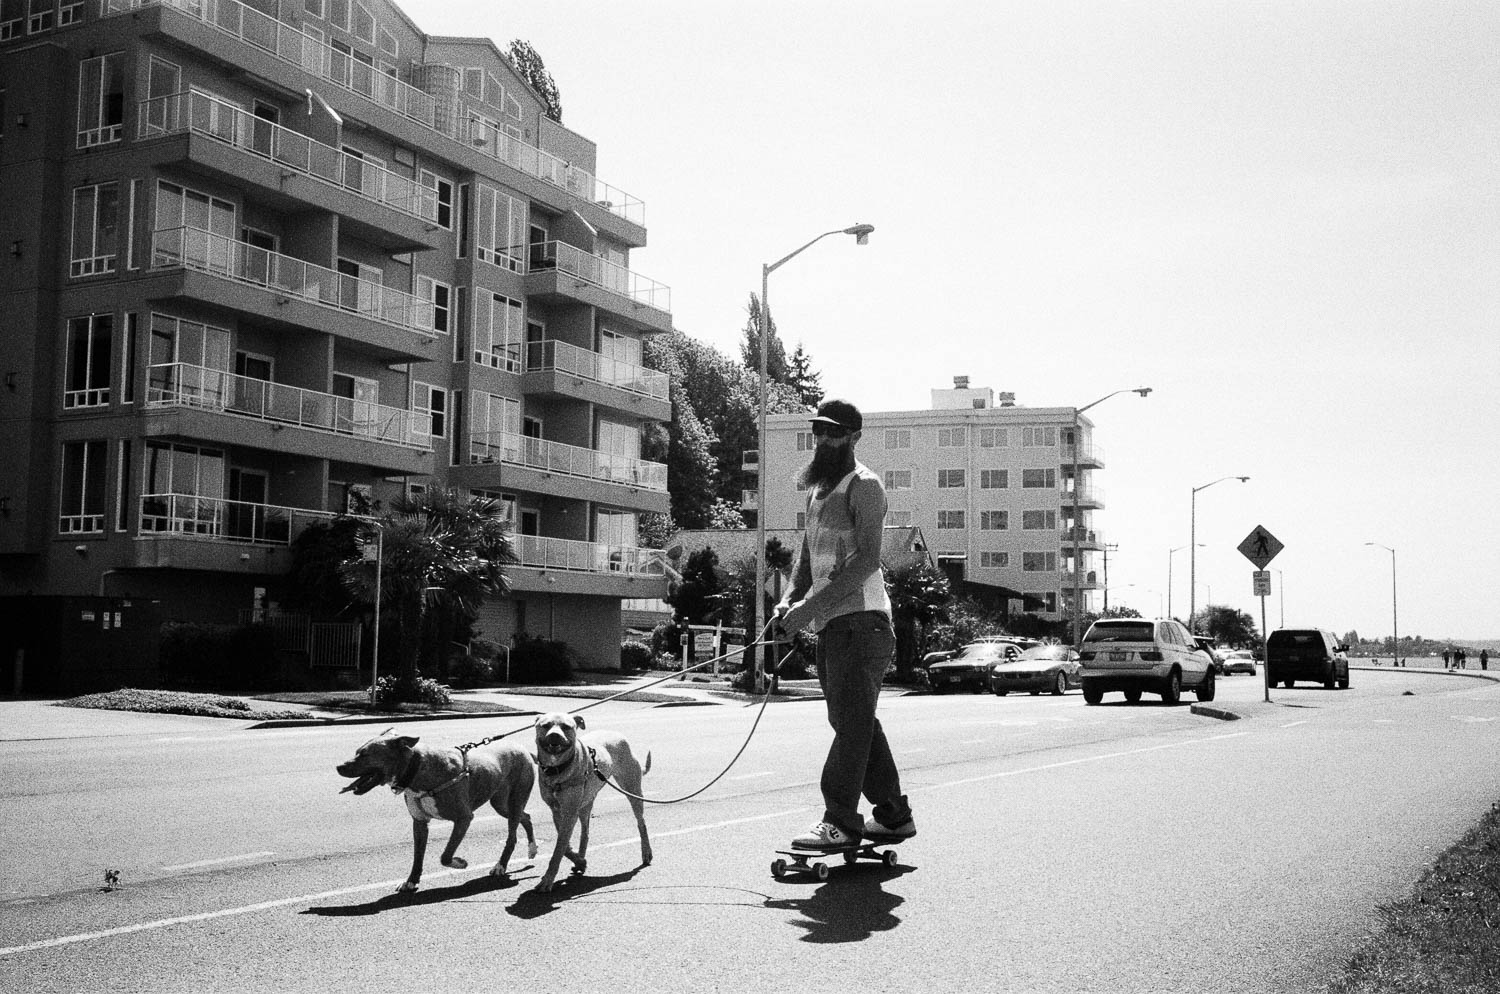 A bearded man on a skateboard being pulled by two dogs